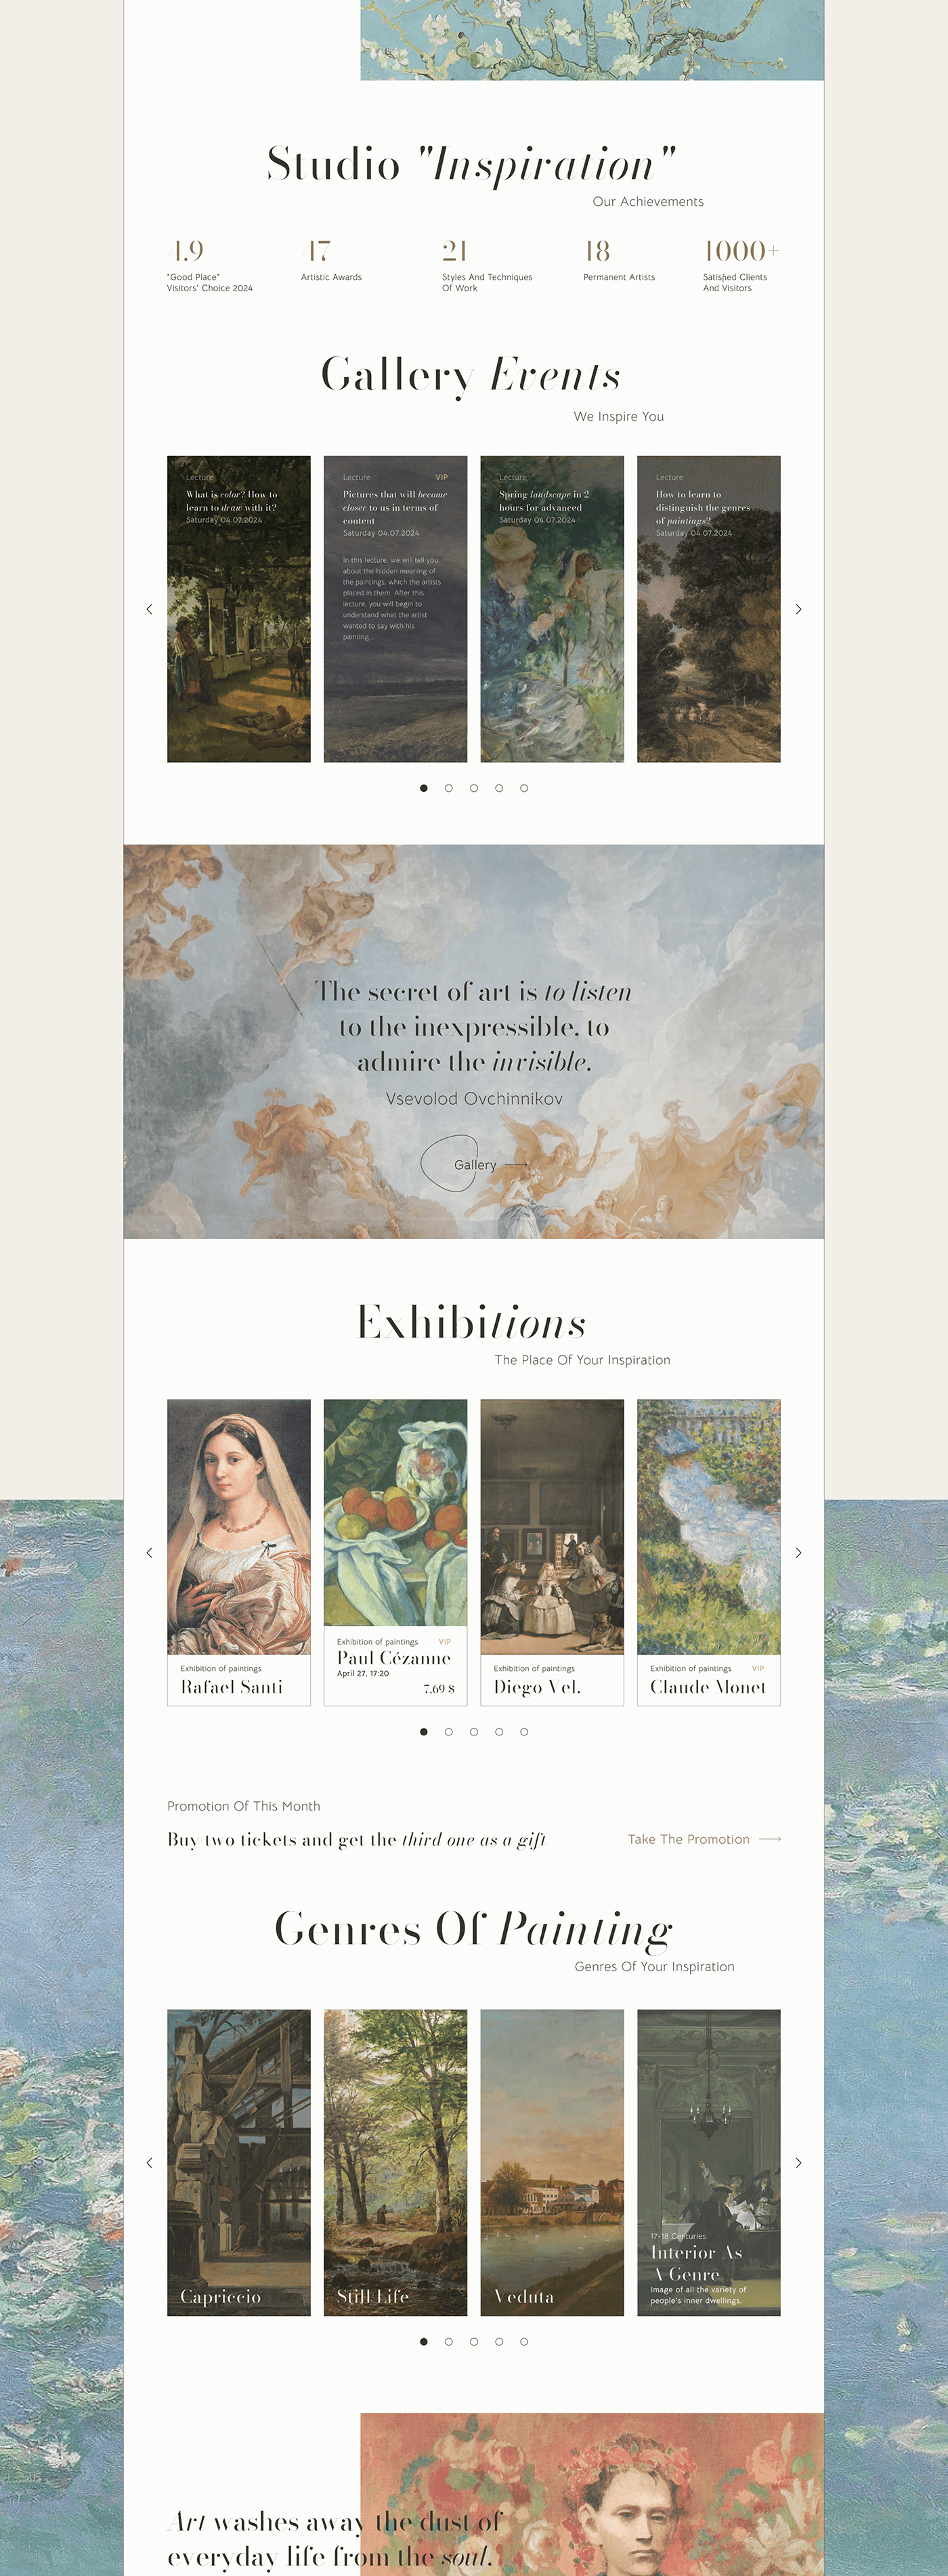 Art Gallery  design painting   inspiration Web Design  UI/UX Figma user experience landing page Website